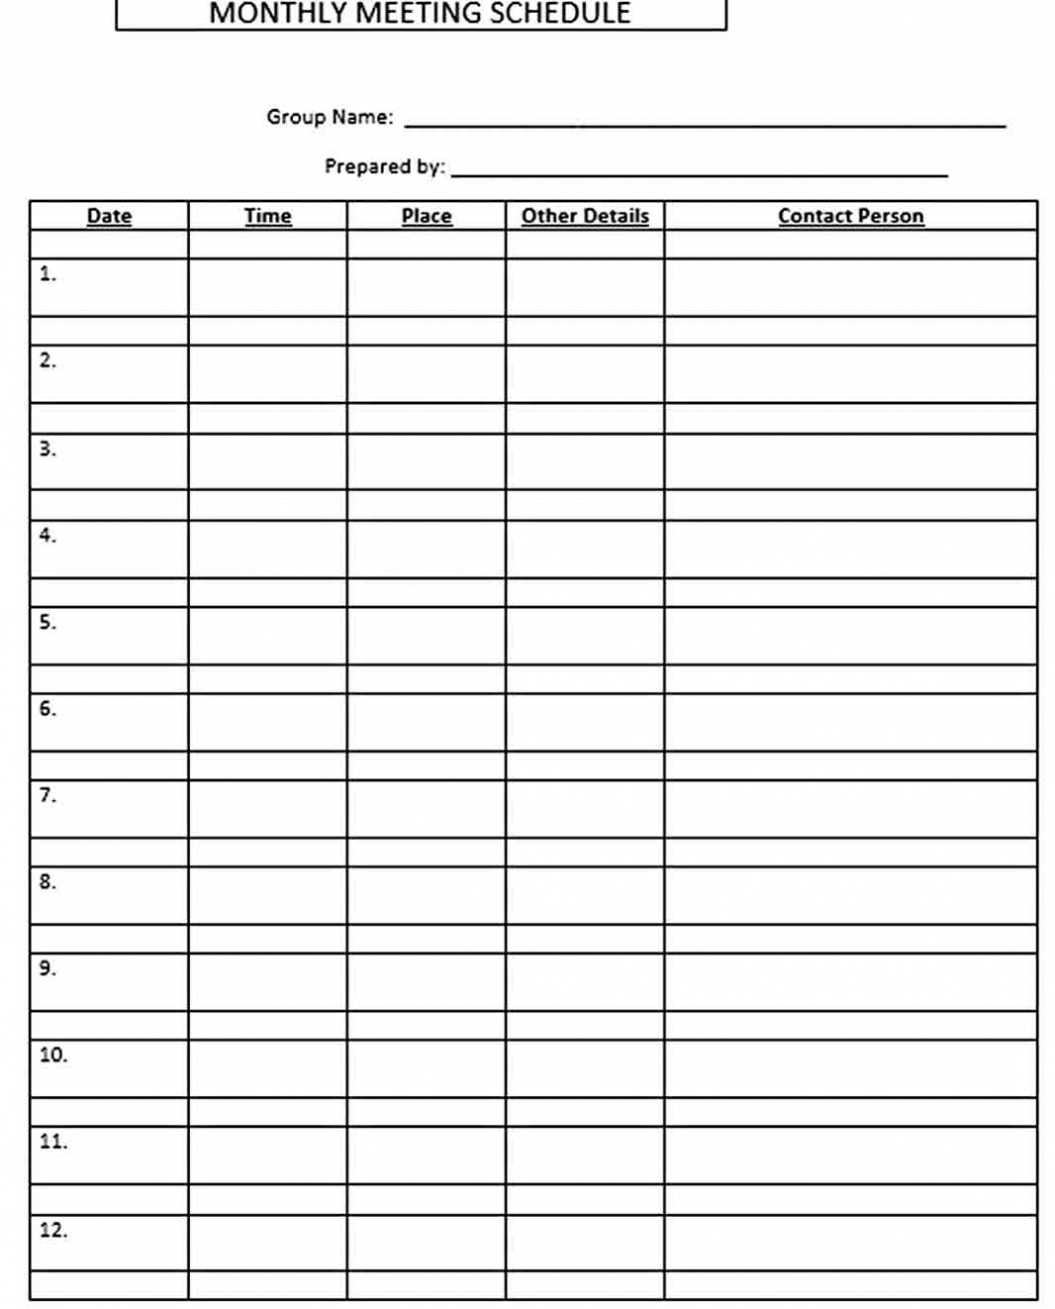 Monthly Work Schedule Template | intended for Monthly Meeting Schedule Template